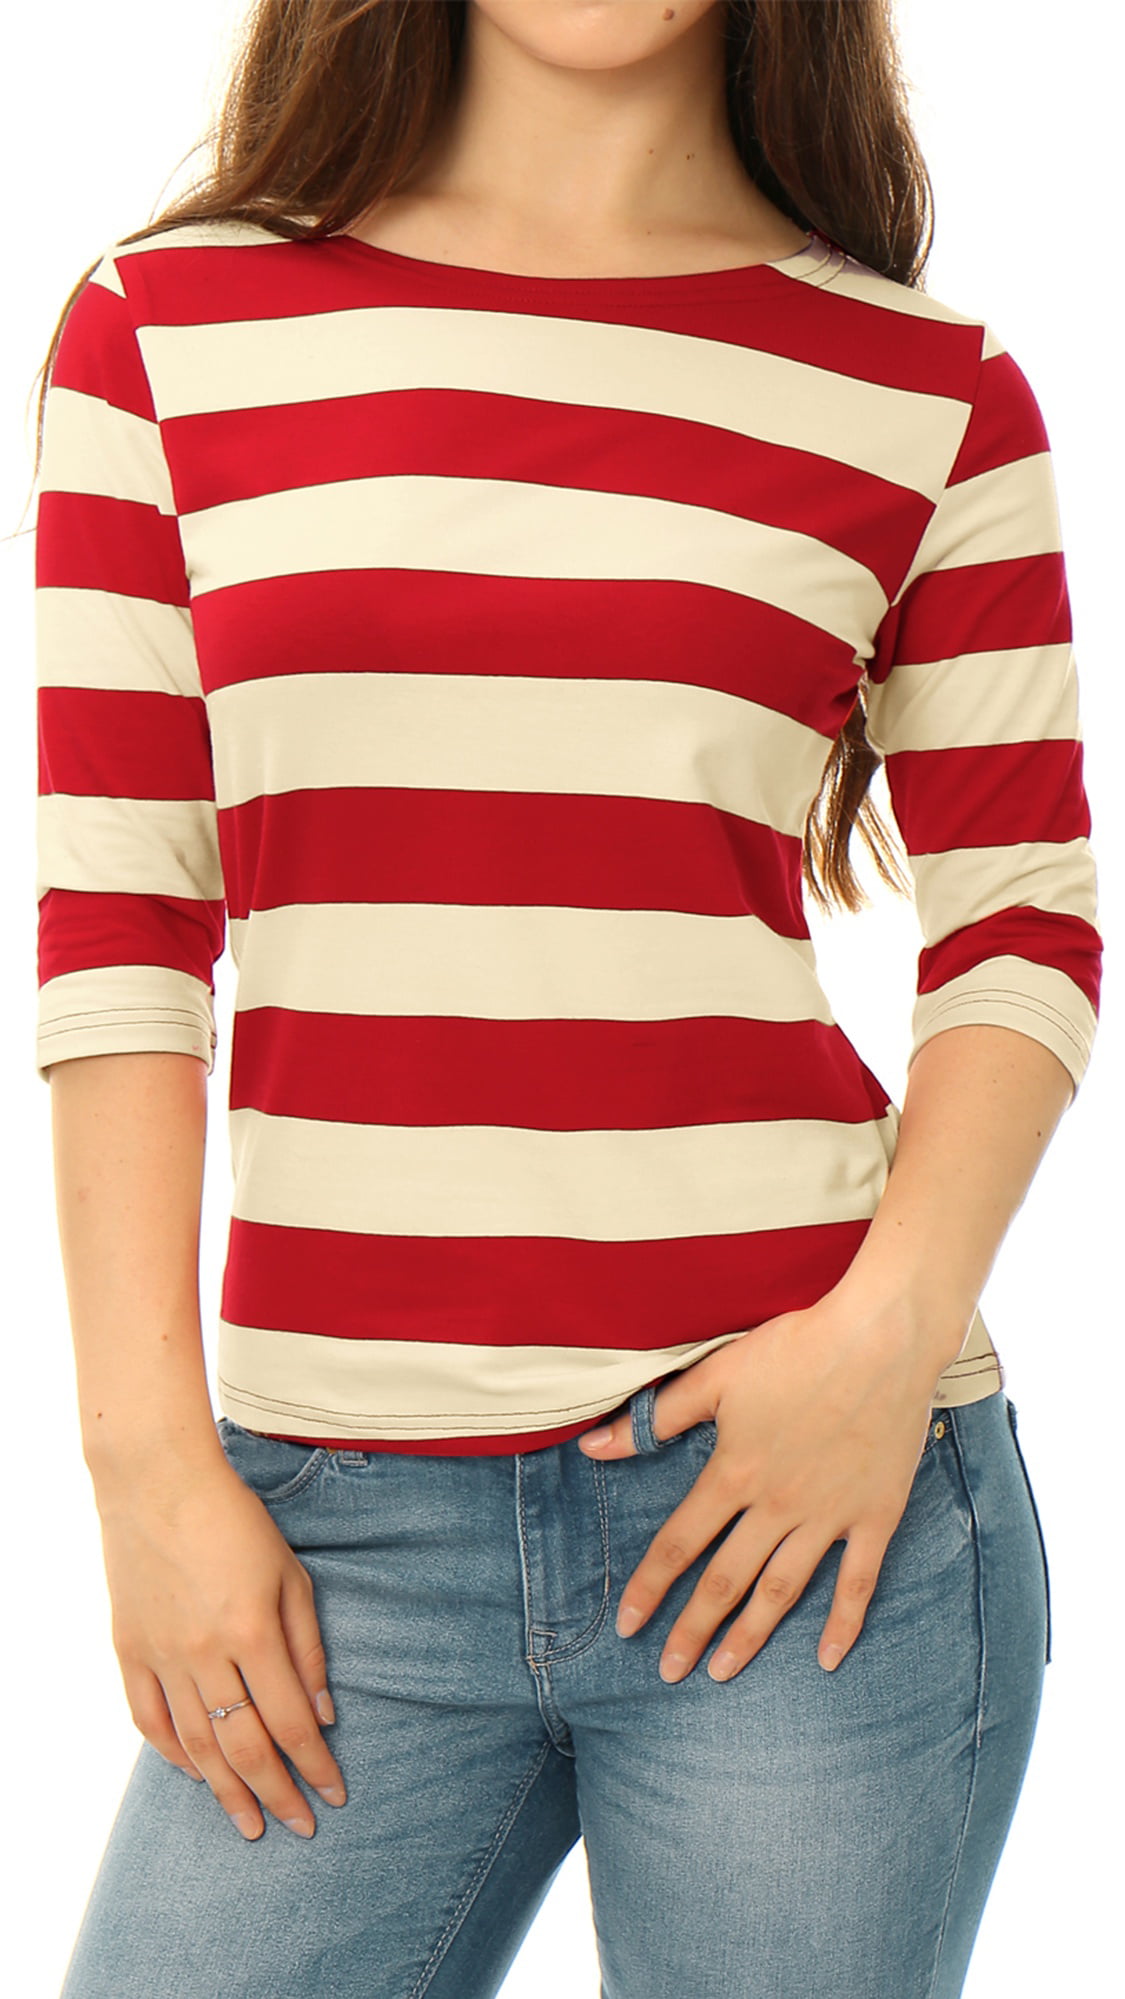 Women's Boat Neck Elbow Sleeves Slim Fit Basic Striped Tee Shirt Blouse ...